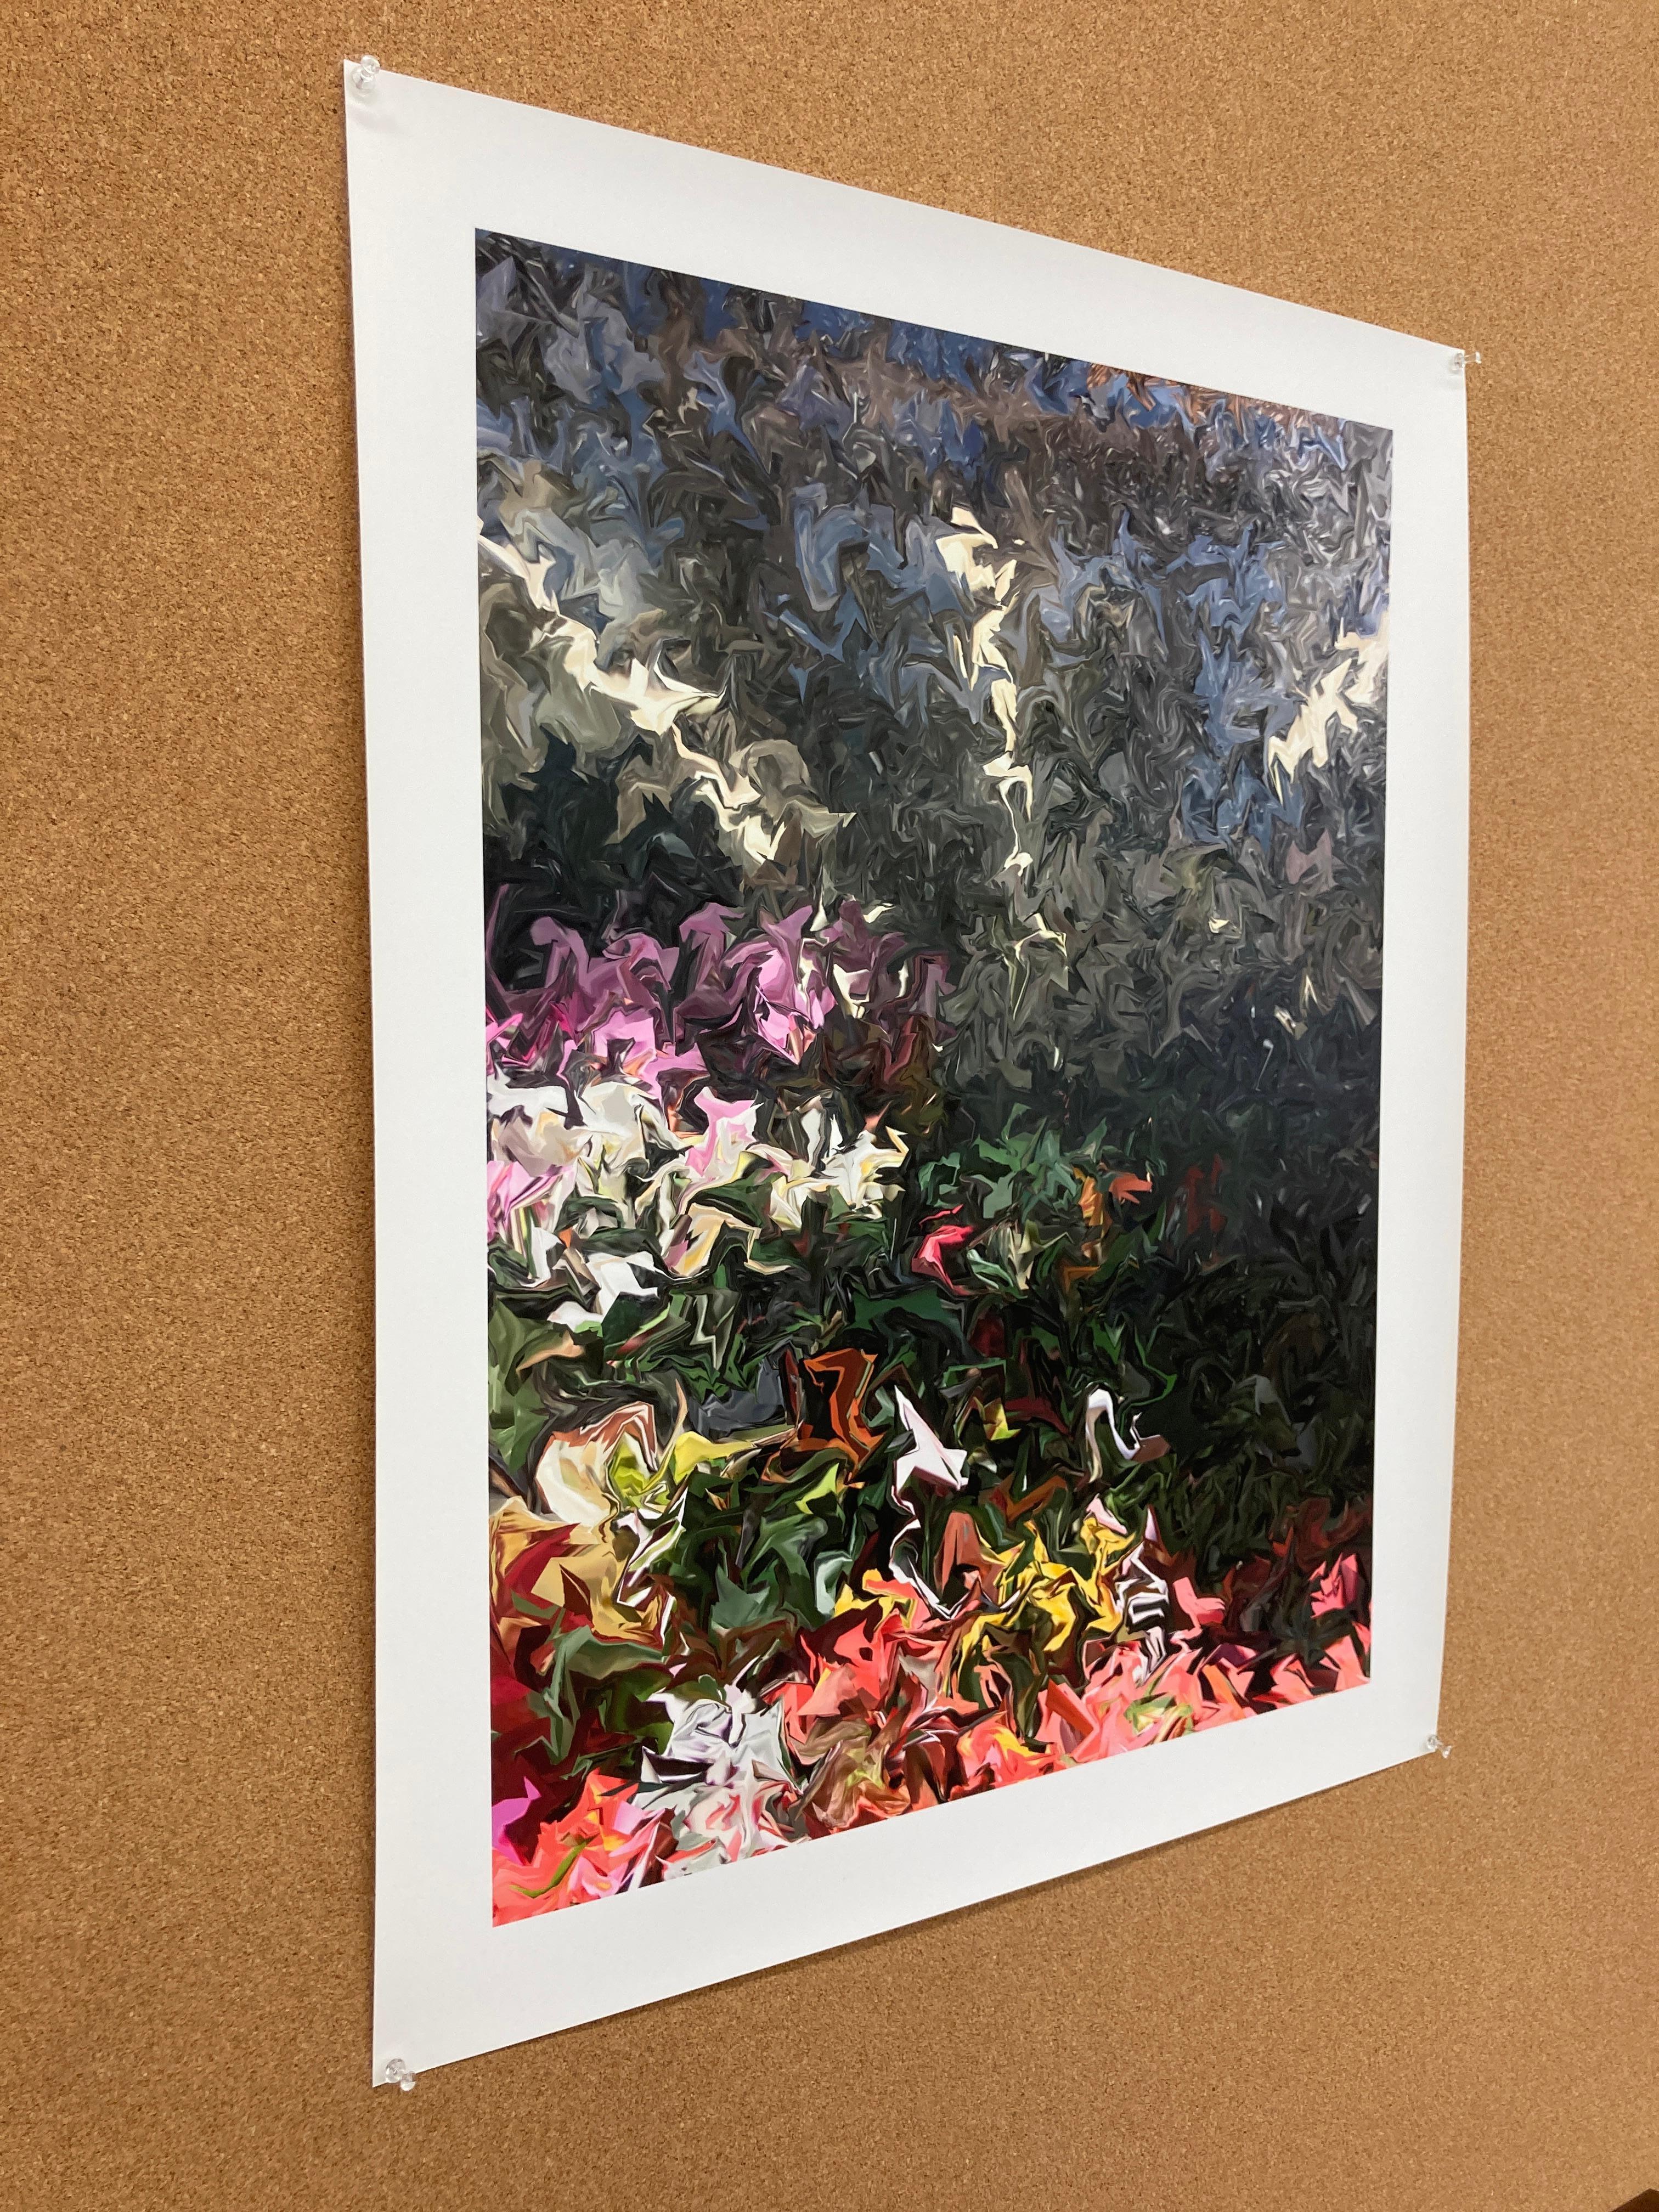 Begonias and Orchids, 2018, digitally manipulated photograph, signed - Black Abstract Print by Gary Cruz